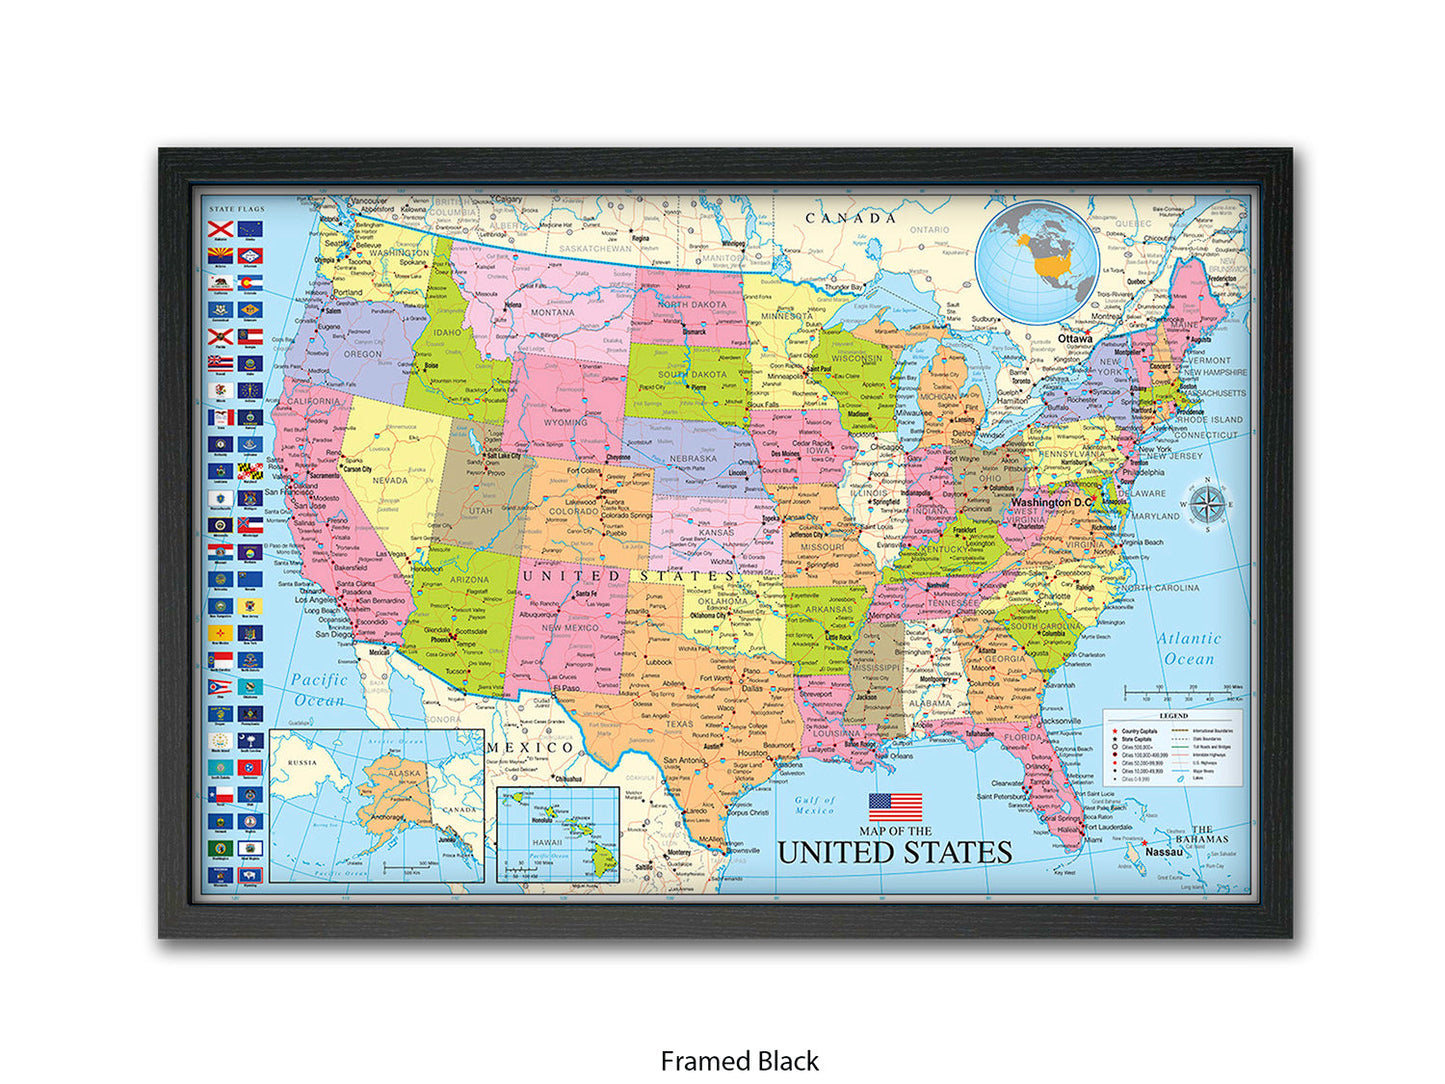 Unted States Map Poster with State Flags